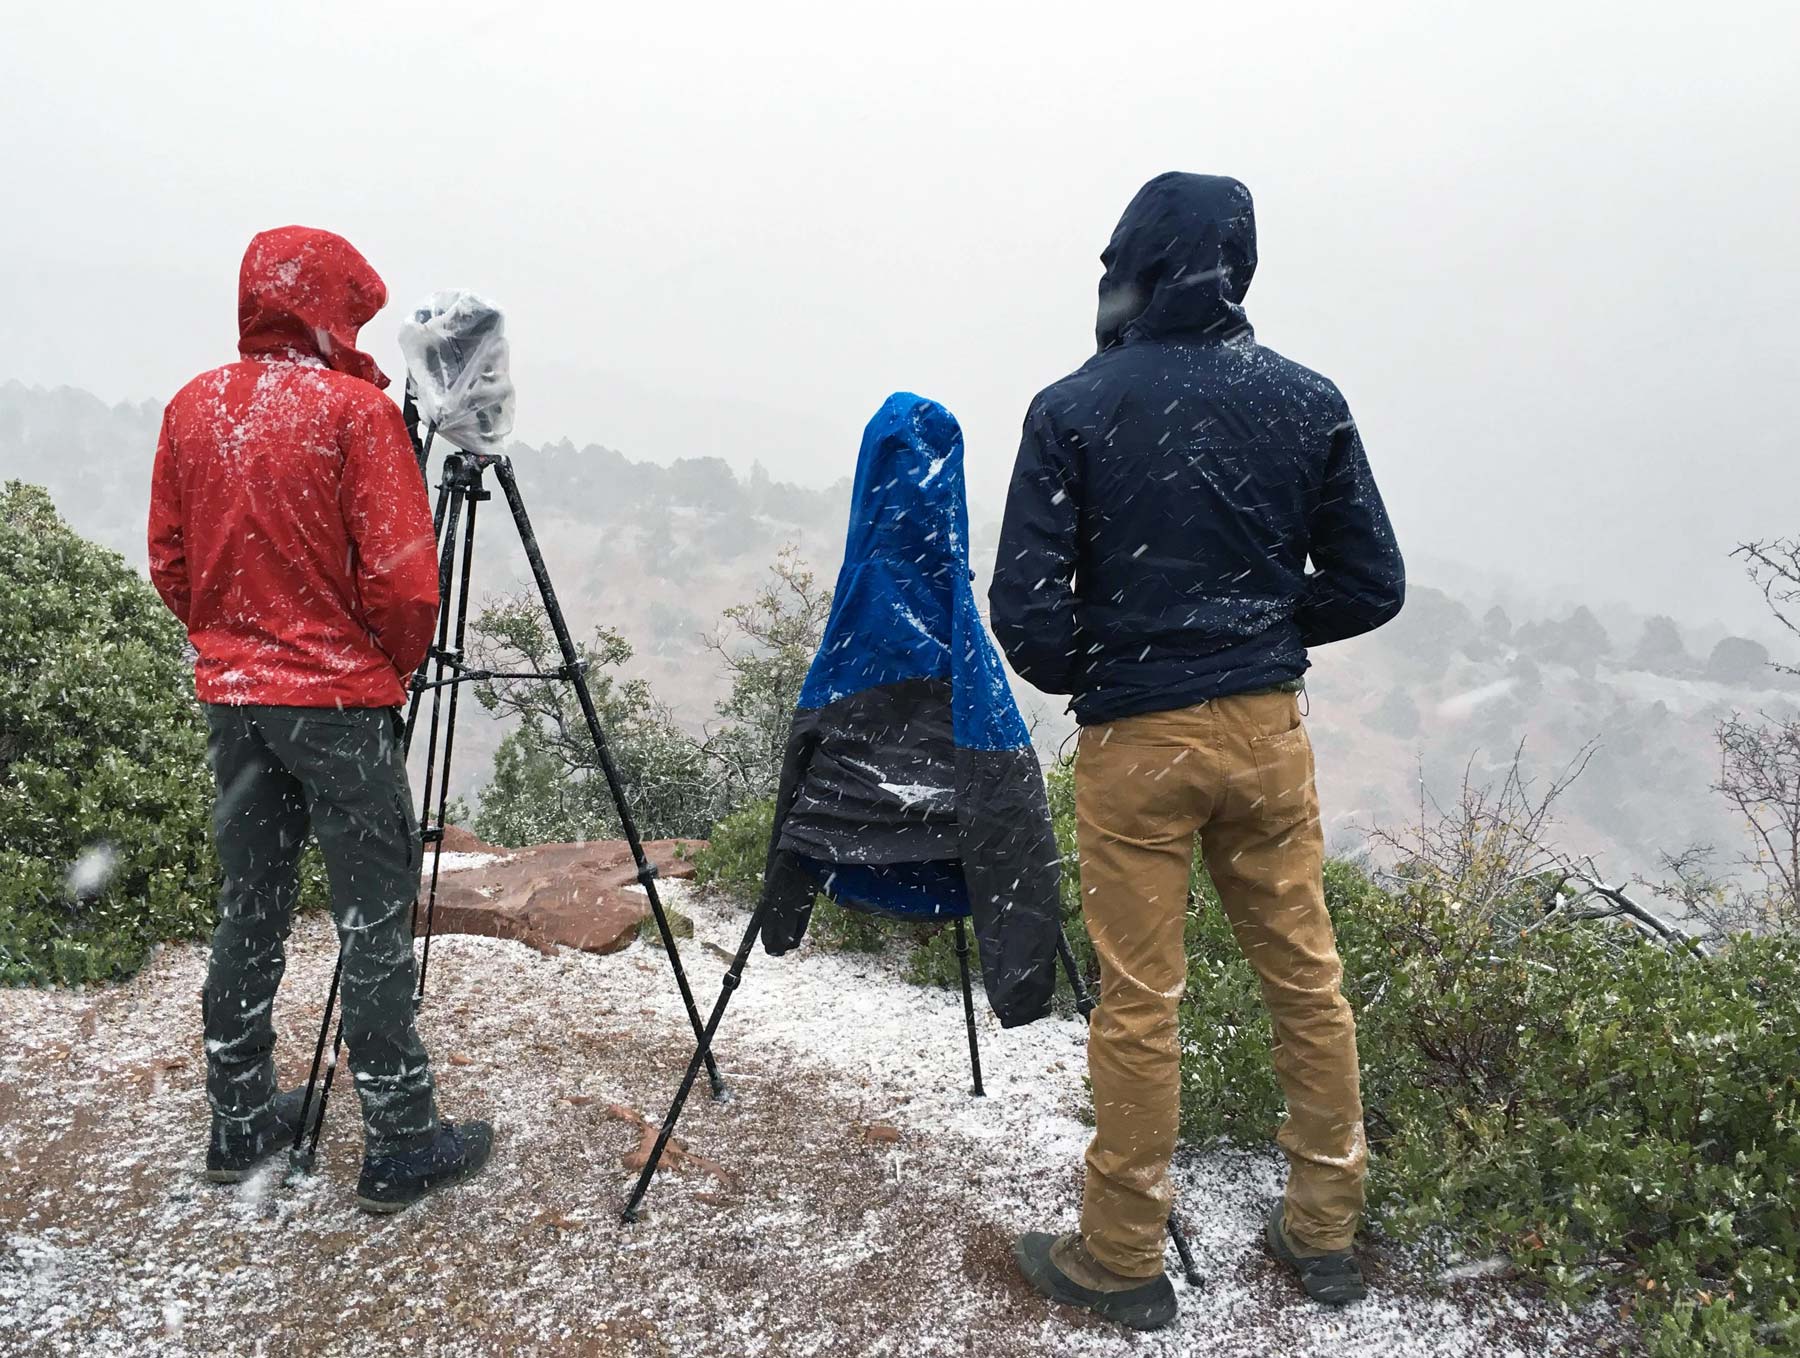 the pattiz brothers (will and jim) taking a time lapse in a storm storm in Kolob Canyon at Zion National Park